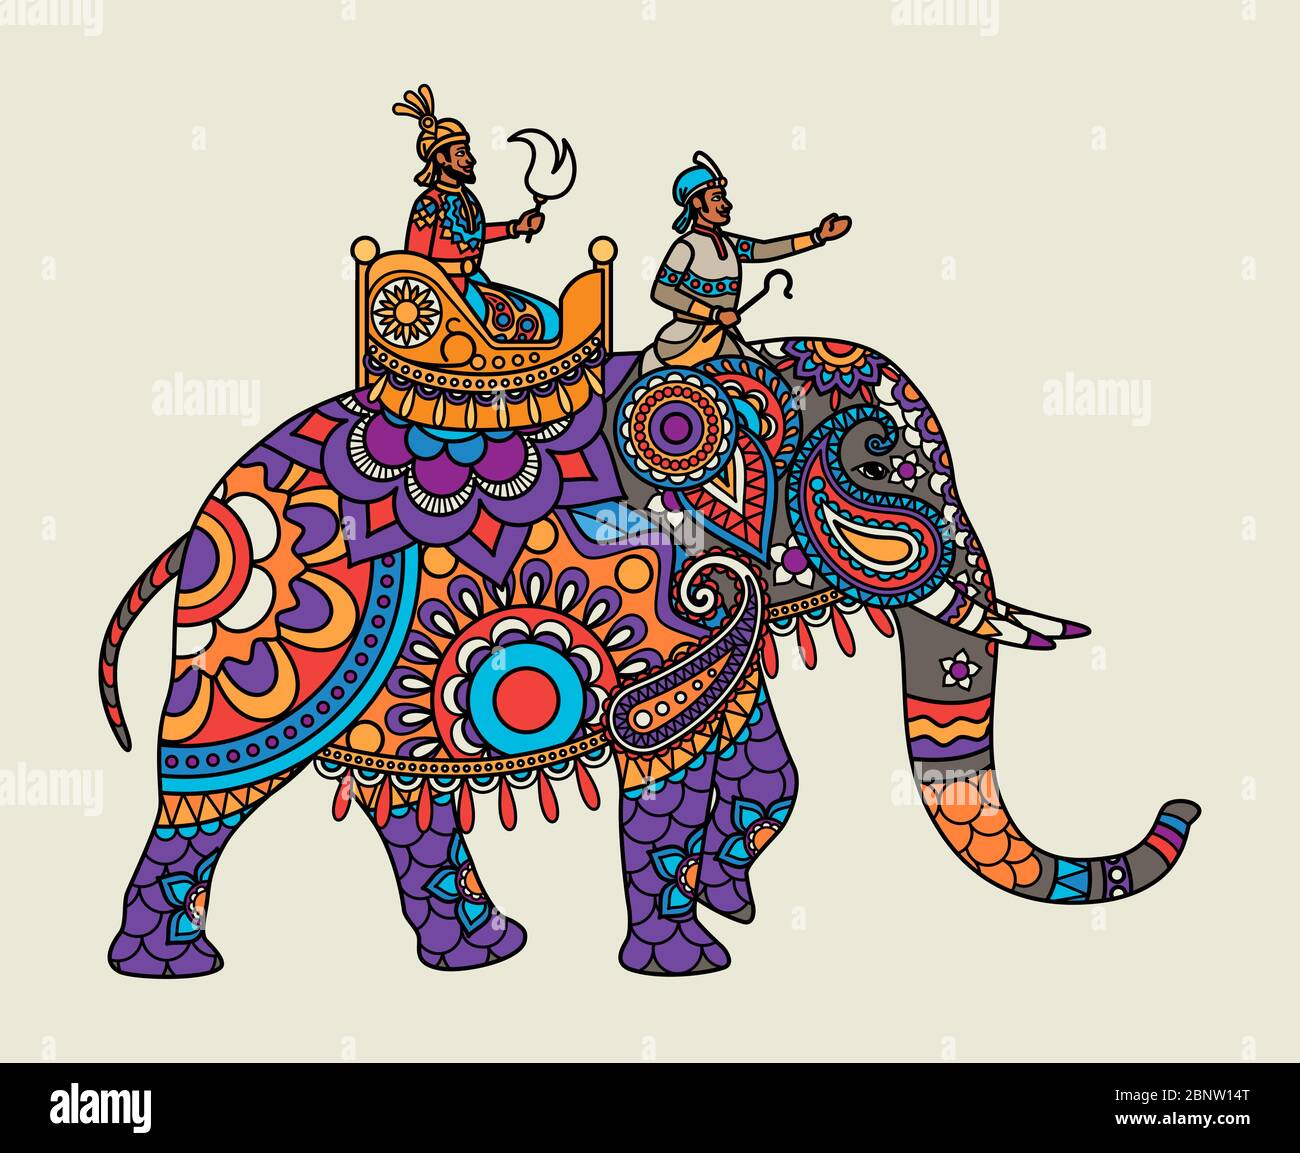 Indian ornate maharajah on the elephant. Vector illustration Stock Vector